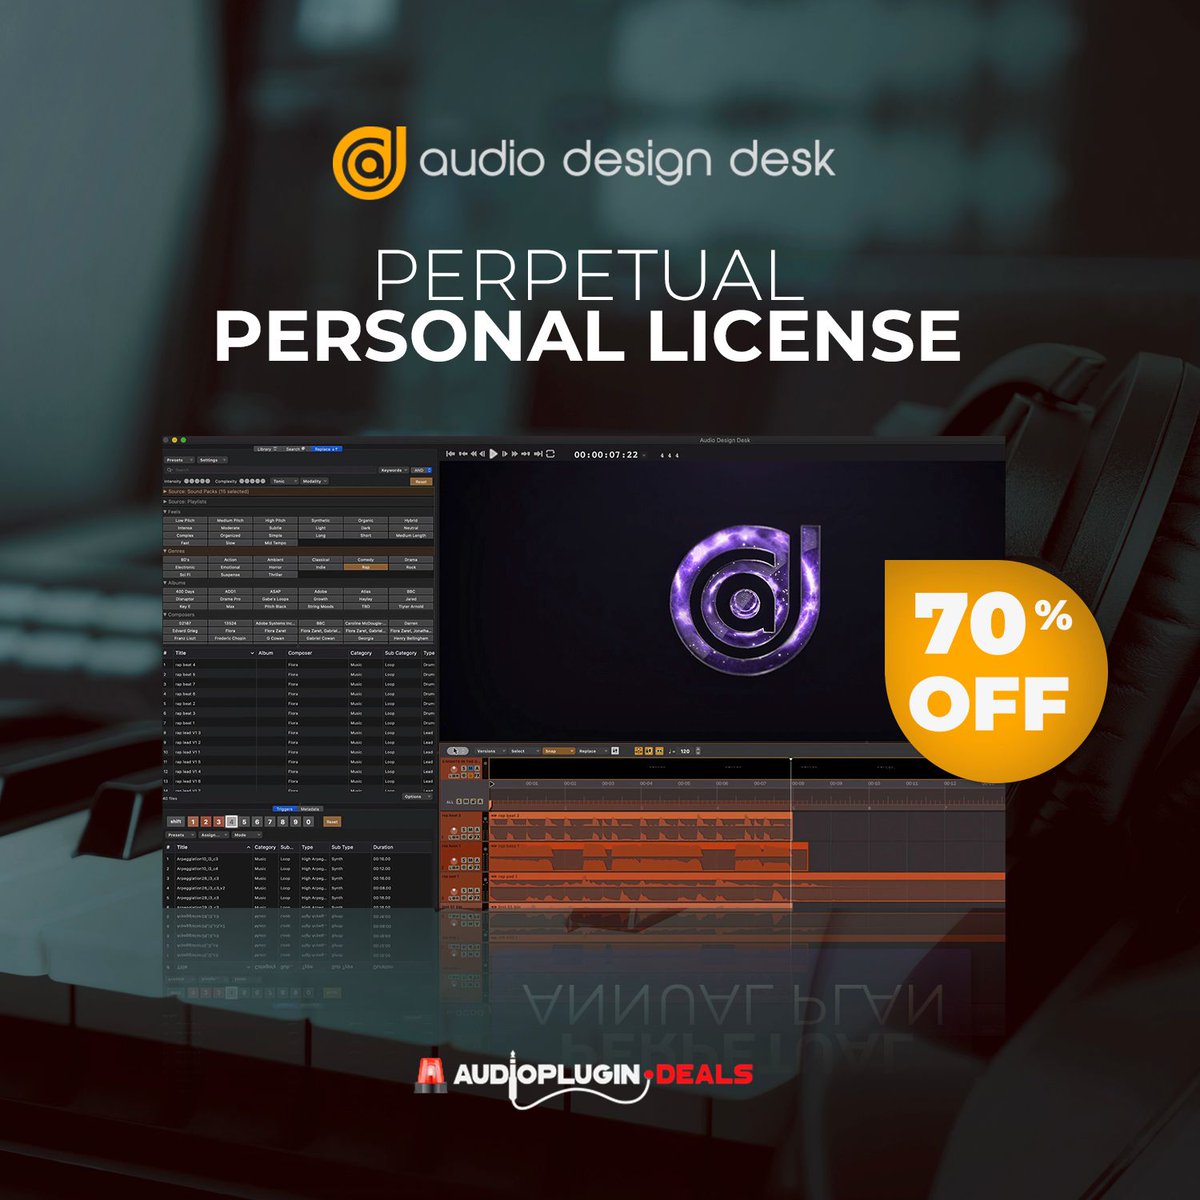 ⏰ Limited time offer: Audio Design Desk is offering a 70% discount on Personal Perpetual License for Mac users. Now at $89.00, down from $299.00. Offer ends on November 26th. ⏰

🔗 audioplugin.deals/product/audio-… (Affiliate Link) 

@audiodesigndesk